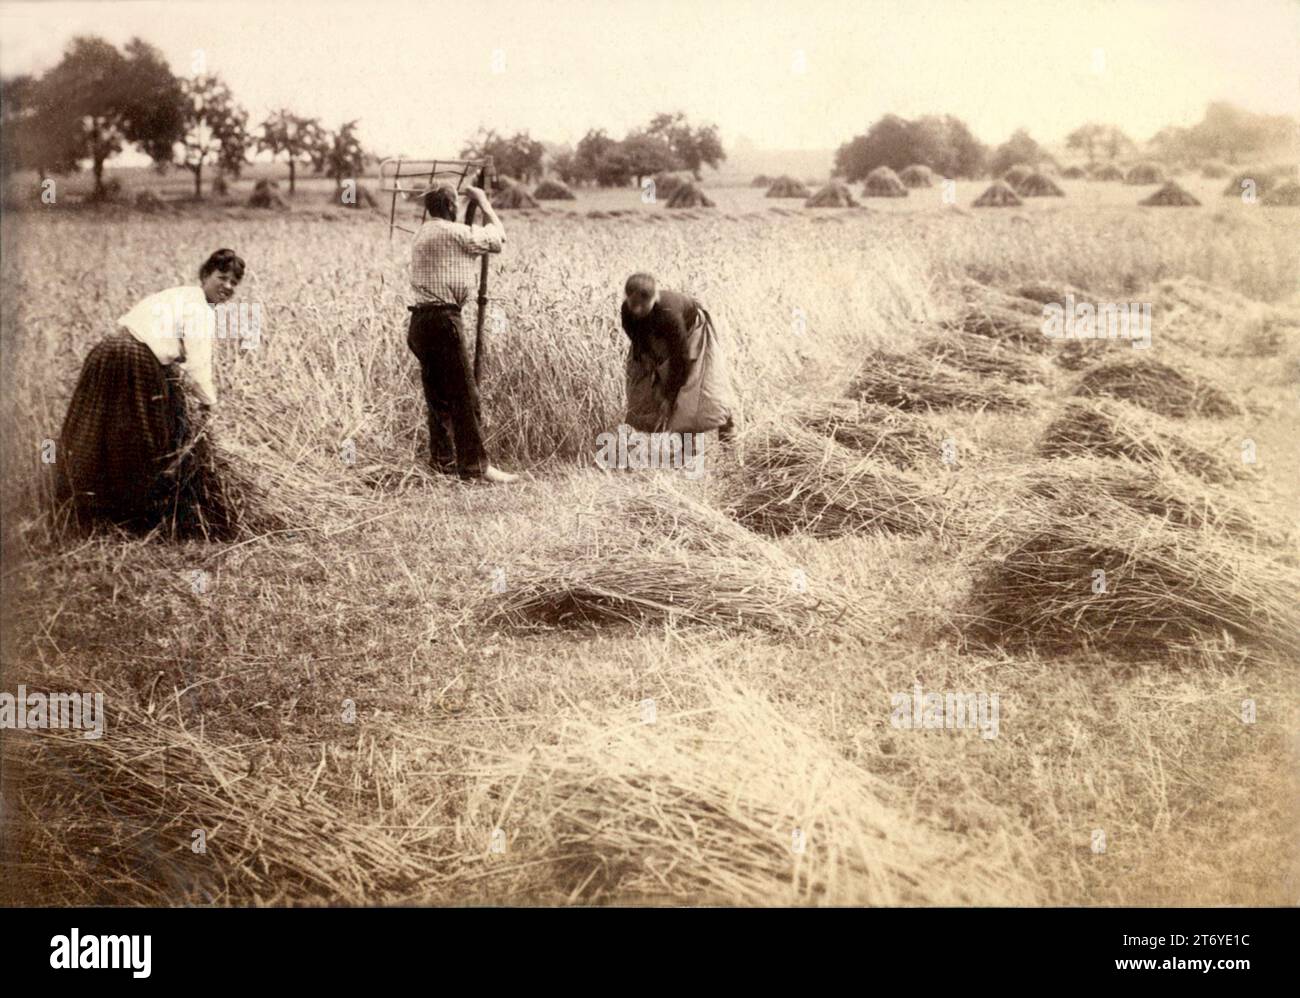 1905 c., FRANCE : Countryside panorama in SUMMERTIME  . Countryside view with women farmers at work in a field while they are reaping or gleaning hay or straw. Image by a non-professional French photographer that is very reminiscent of Pictorialist photographic images and the style of the French Impressionist painters of that period between the nineteenth and twentieth centuries by Jean-François Millet ( 1814 - 1875 ), Vincente Van GOGH , Auguste RENOIR , Gauguin or MONET . Photo by Unknown photographer . -  FRANCIA - FOTO STORICHE - HISTORY PHOTOS - MIETITURA DEL GRANO  -  WHEAT HARVEST Stock Photo